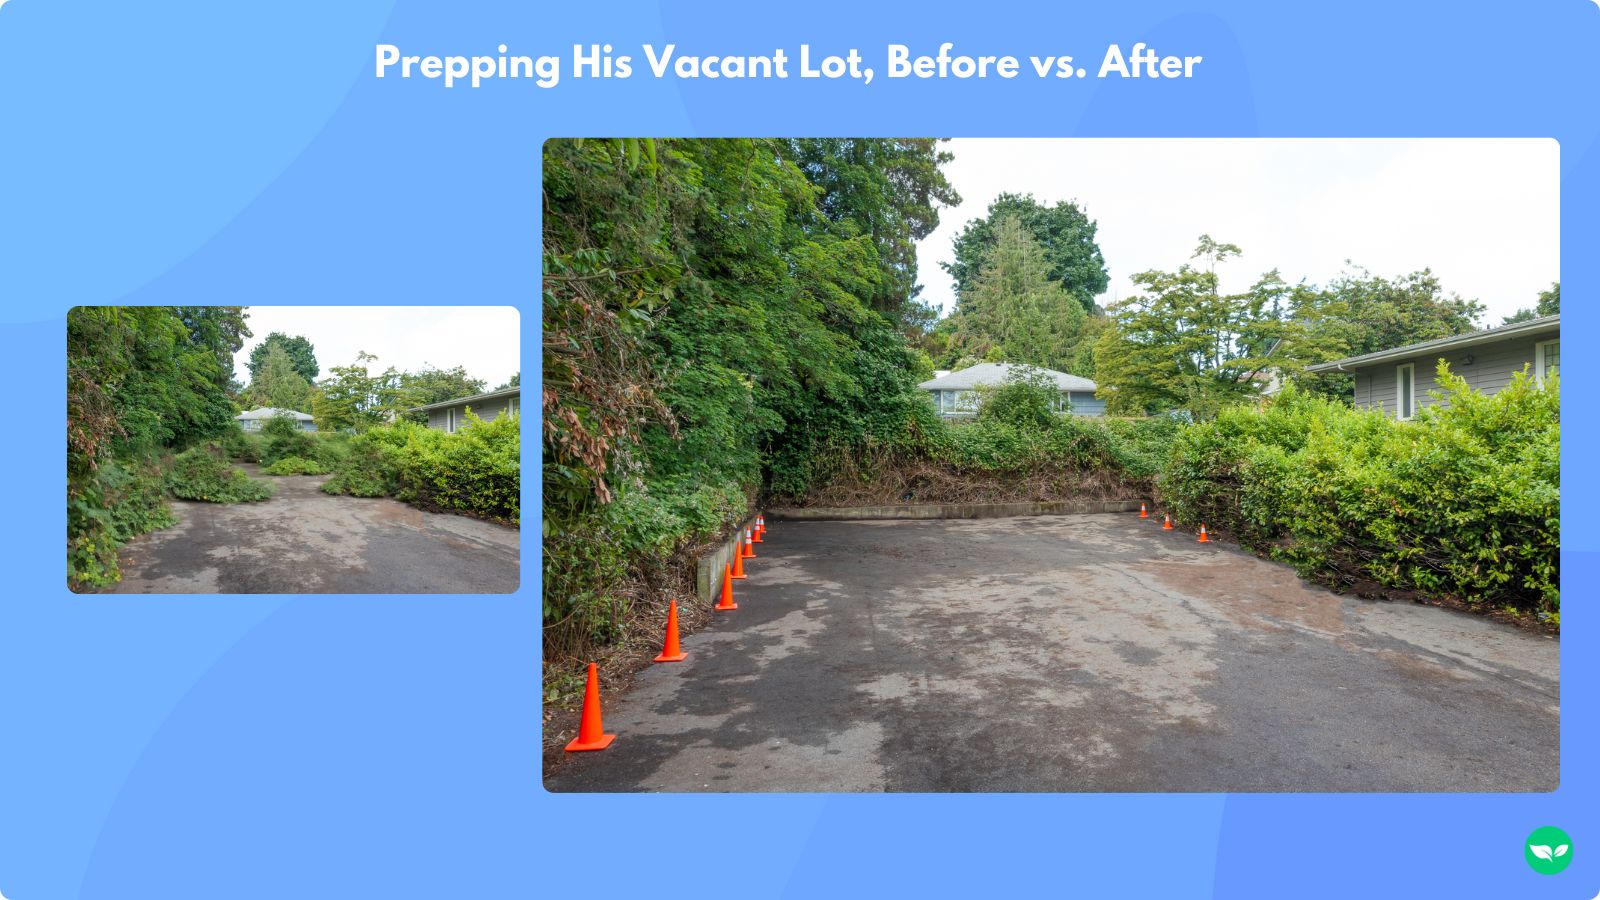 A side by side showing the before and after of Justin's vacant lot